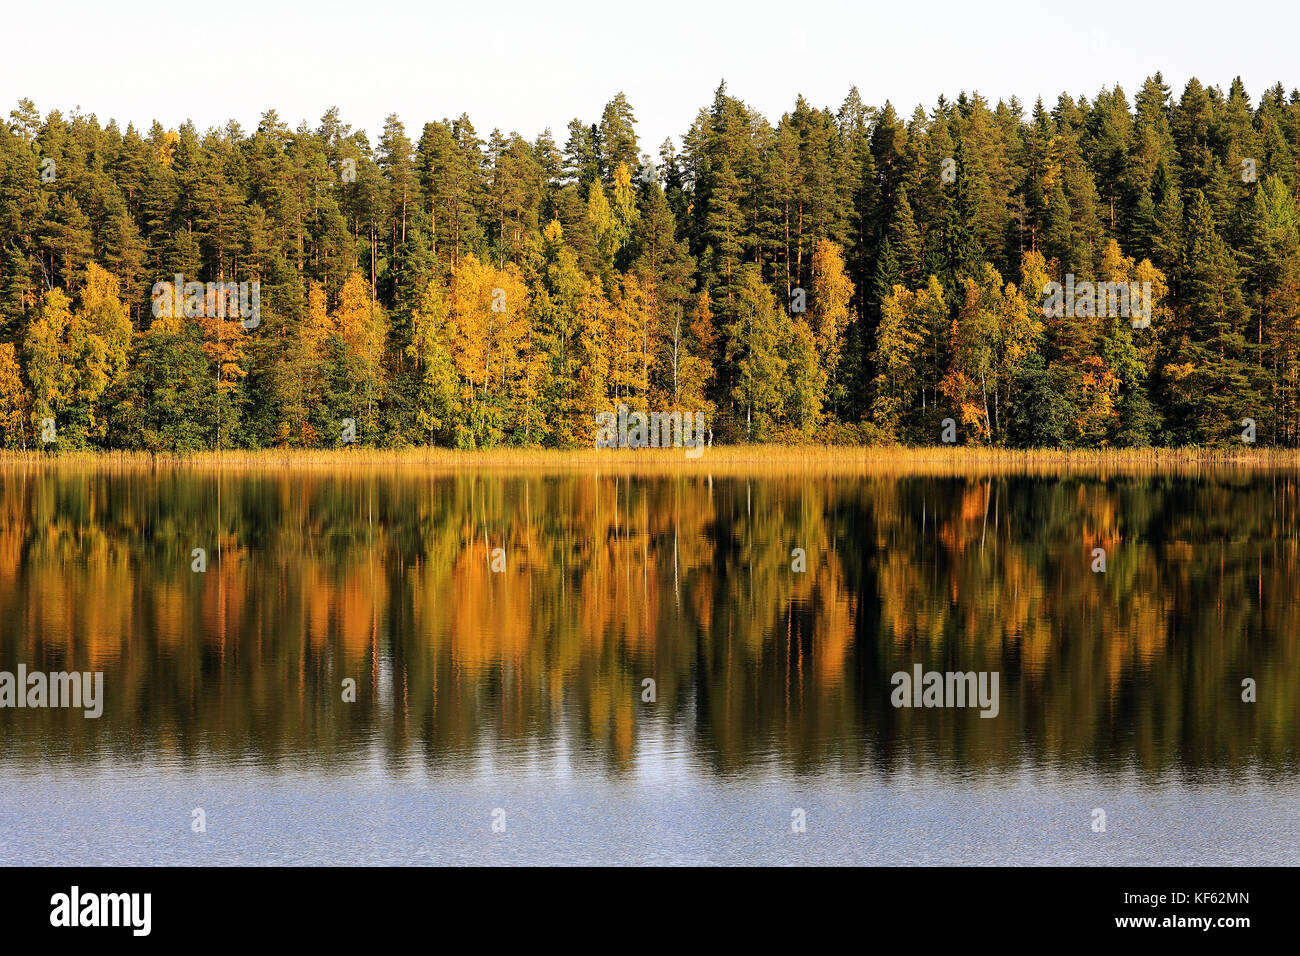 Landscape of a lakeshore with colorful fall foliage which reflects on a tranquil blue lake in autumn. Stock Photo